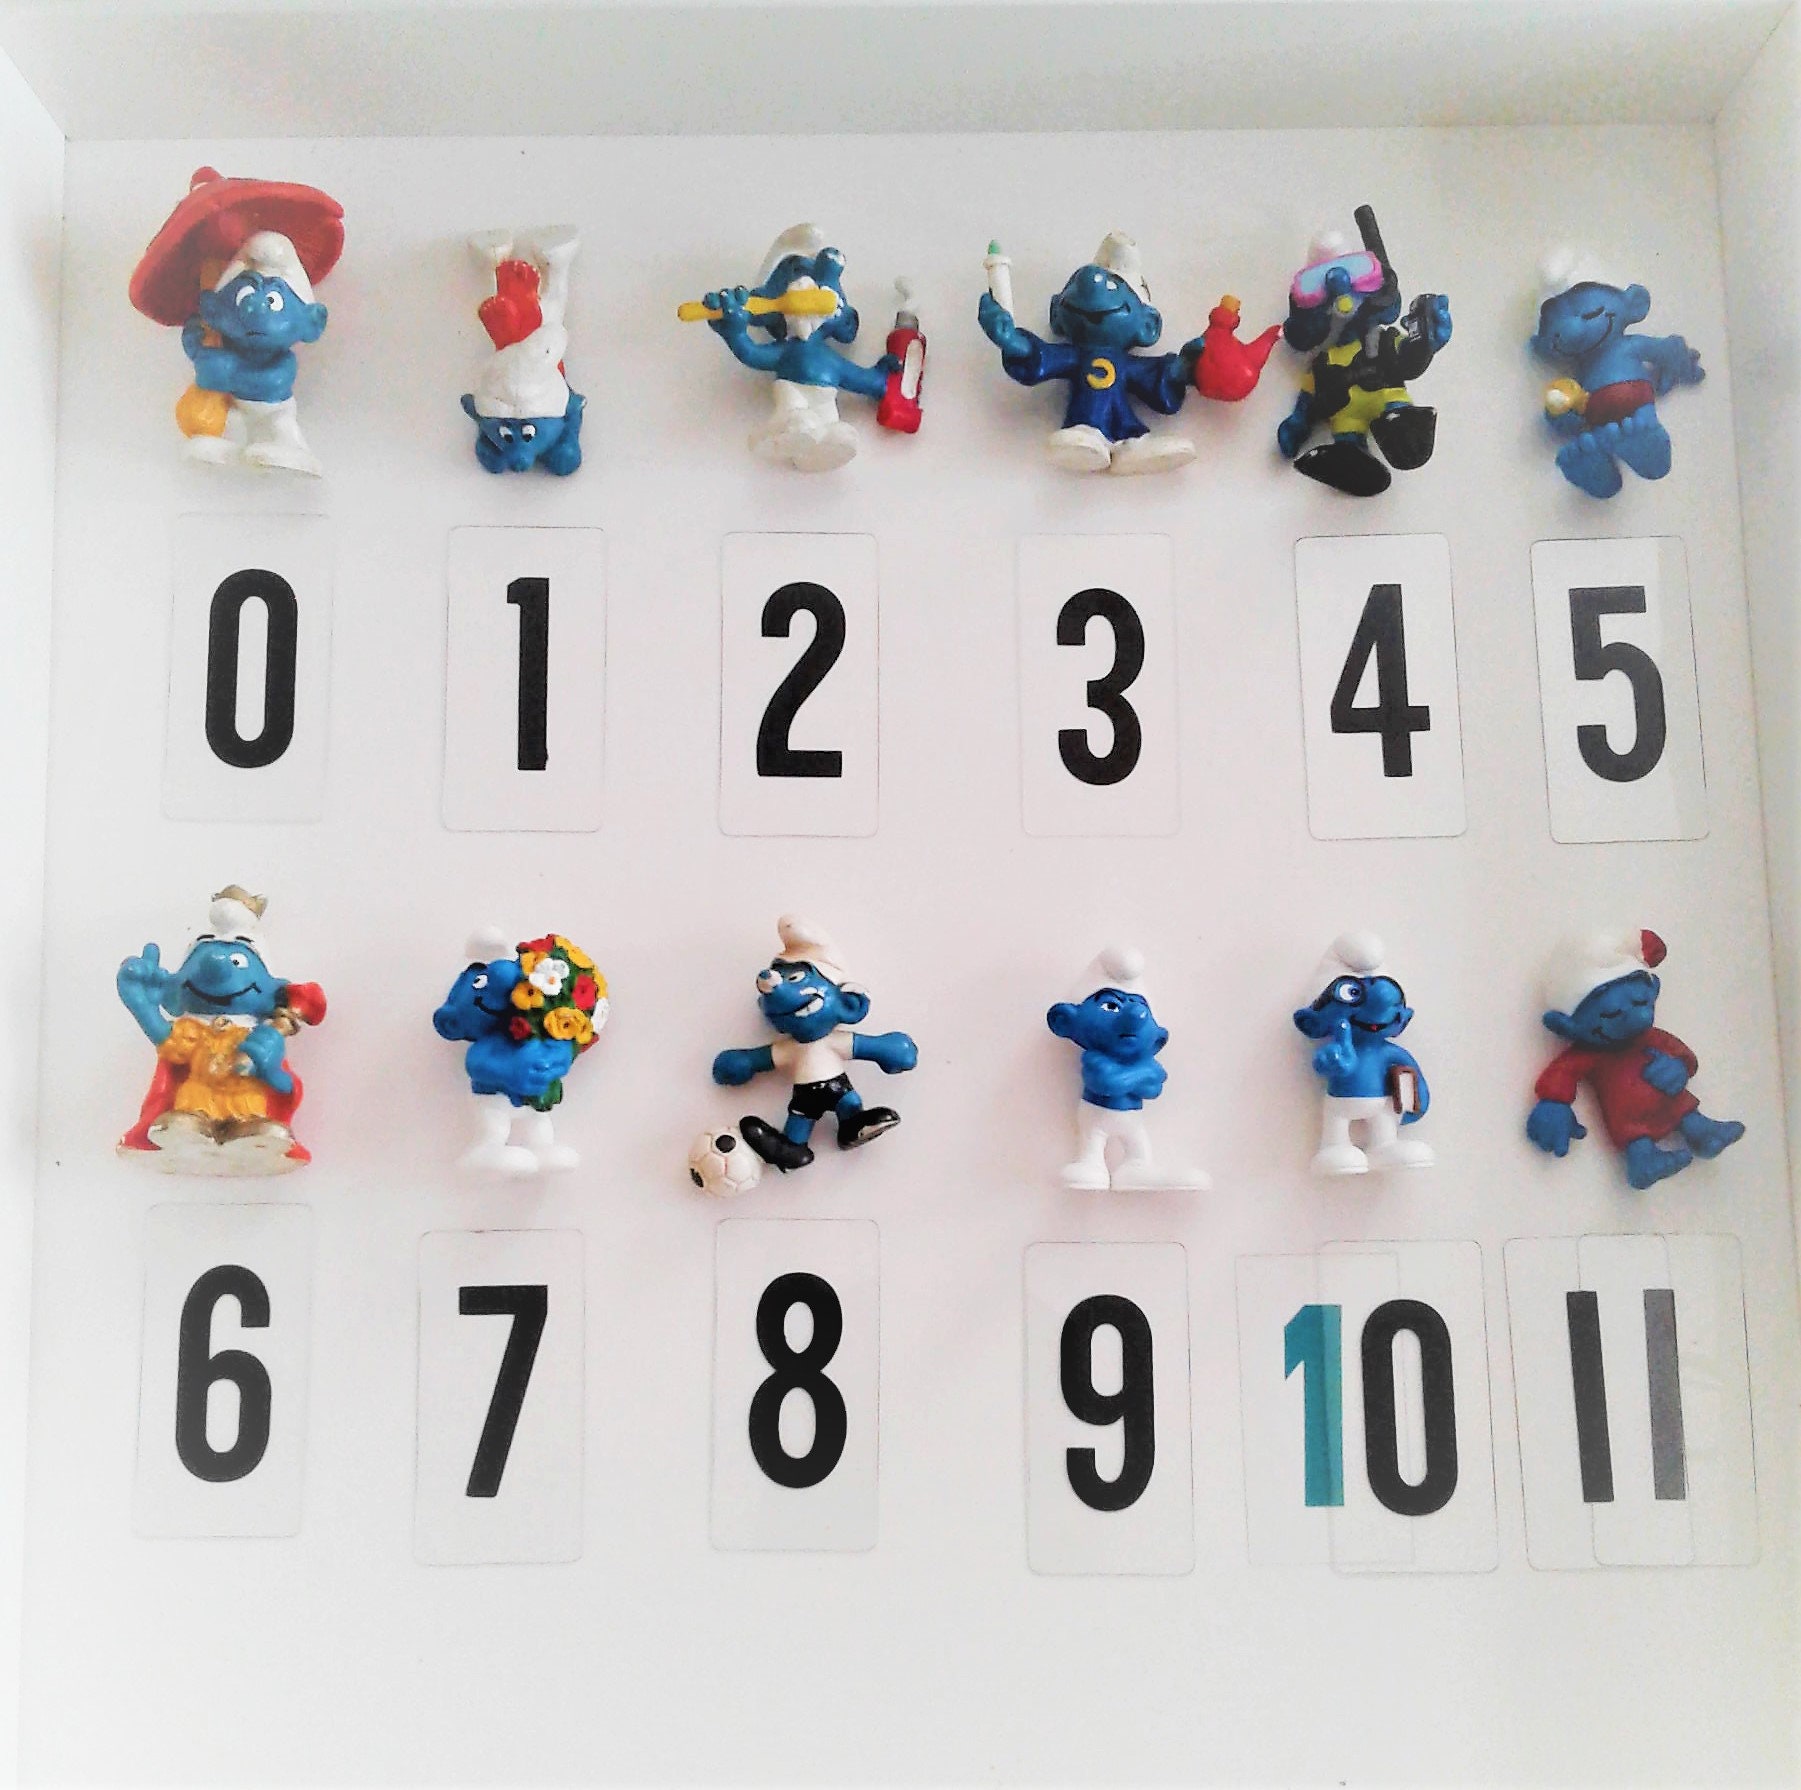 Choose the Ones You 80s Smurfs Pvc Figures Toy - Etsy